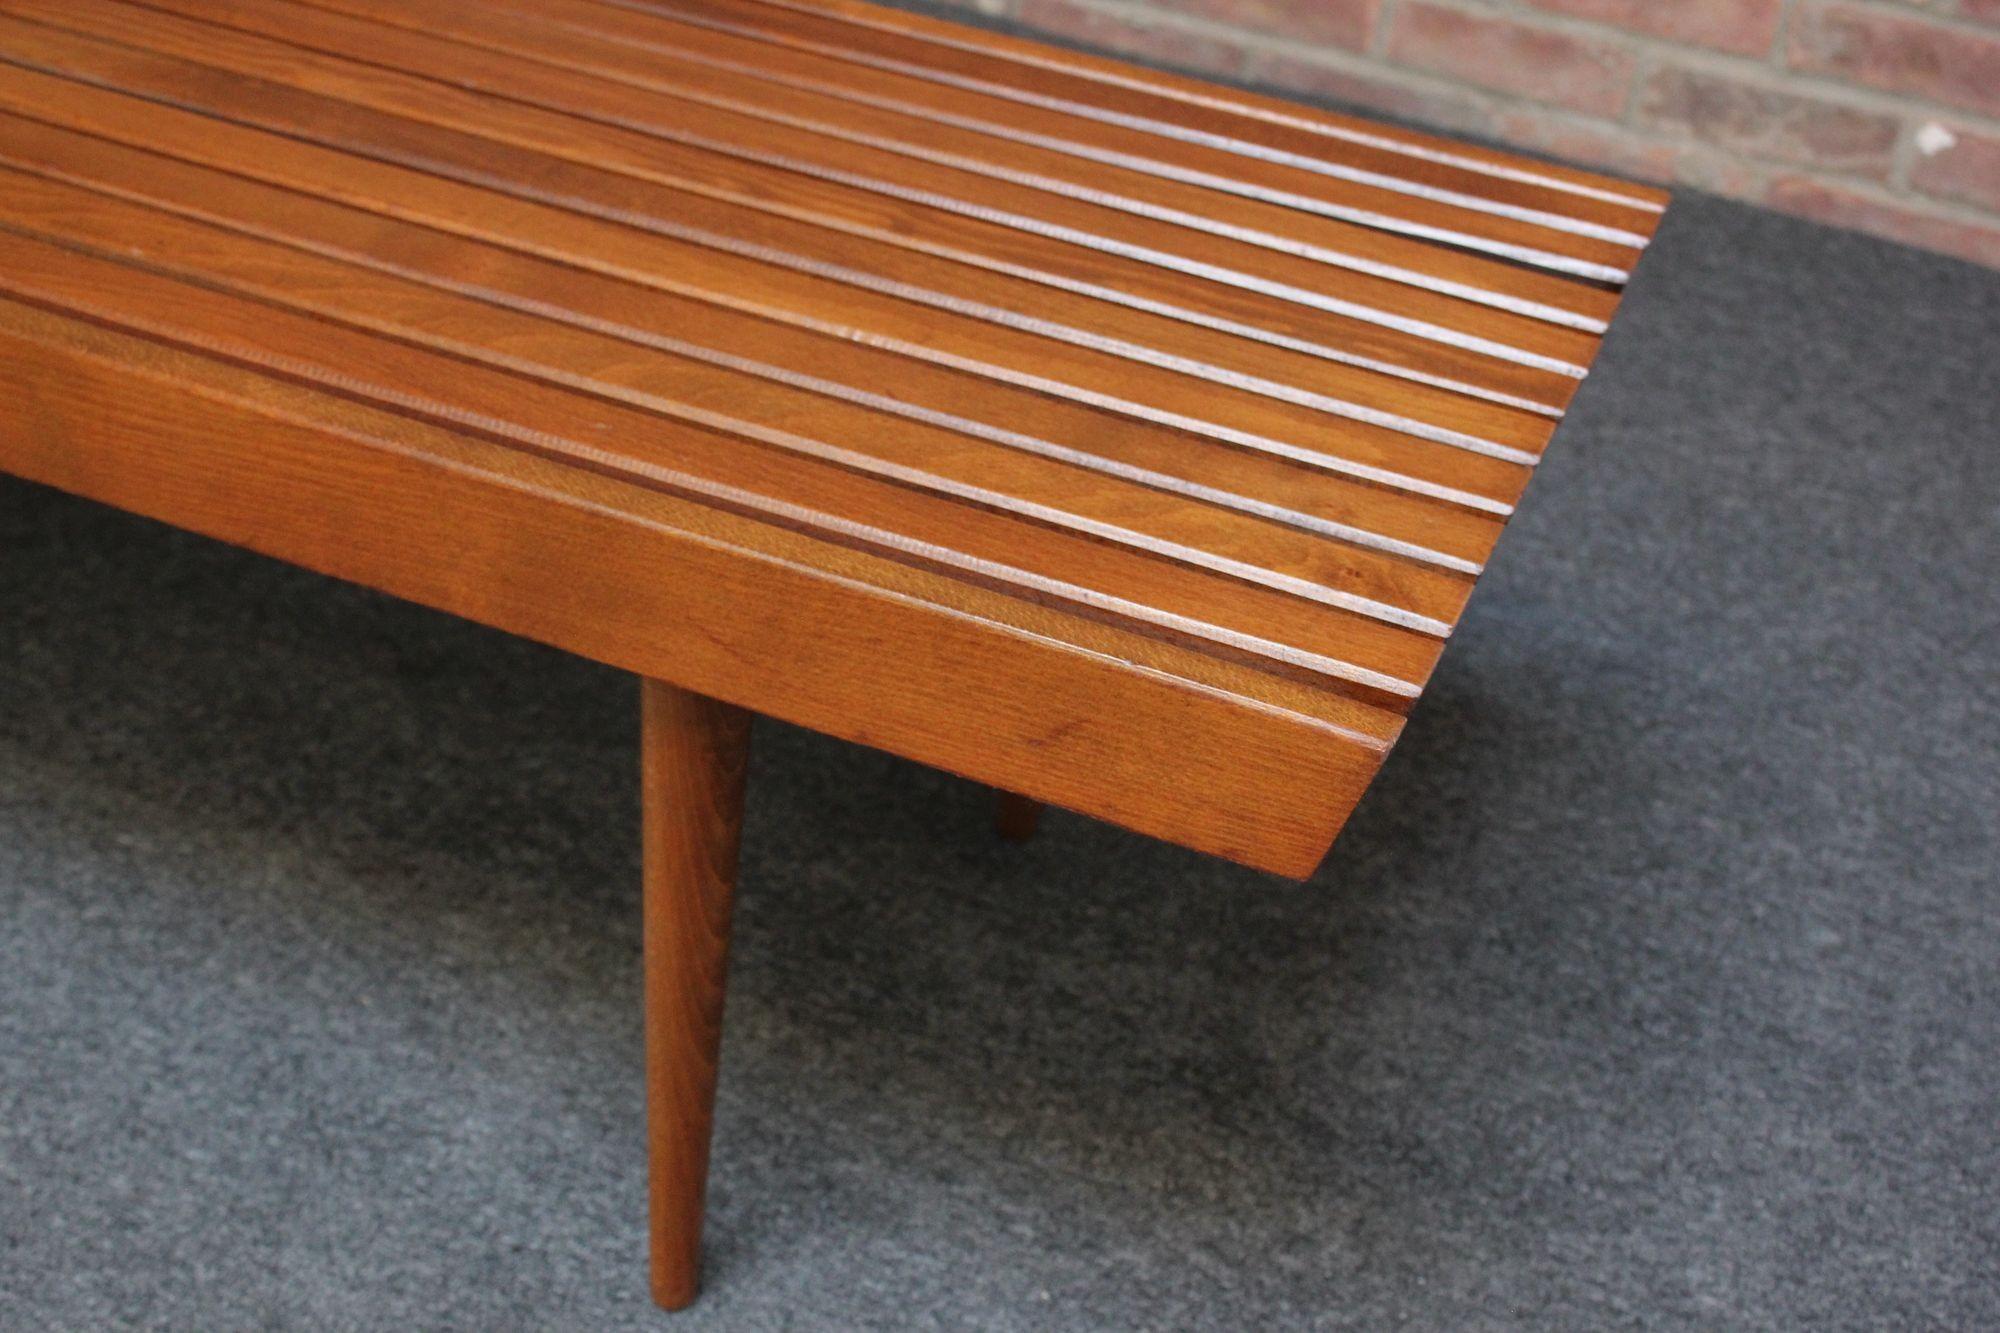 Long Mid-Century Modern Walnut Slatted Bench / Coffee Table with Tapered Legs For Sale 6